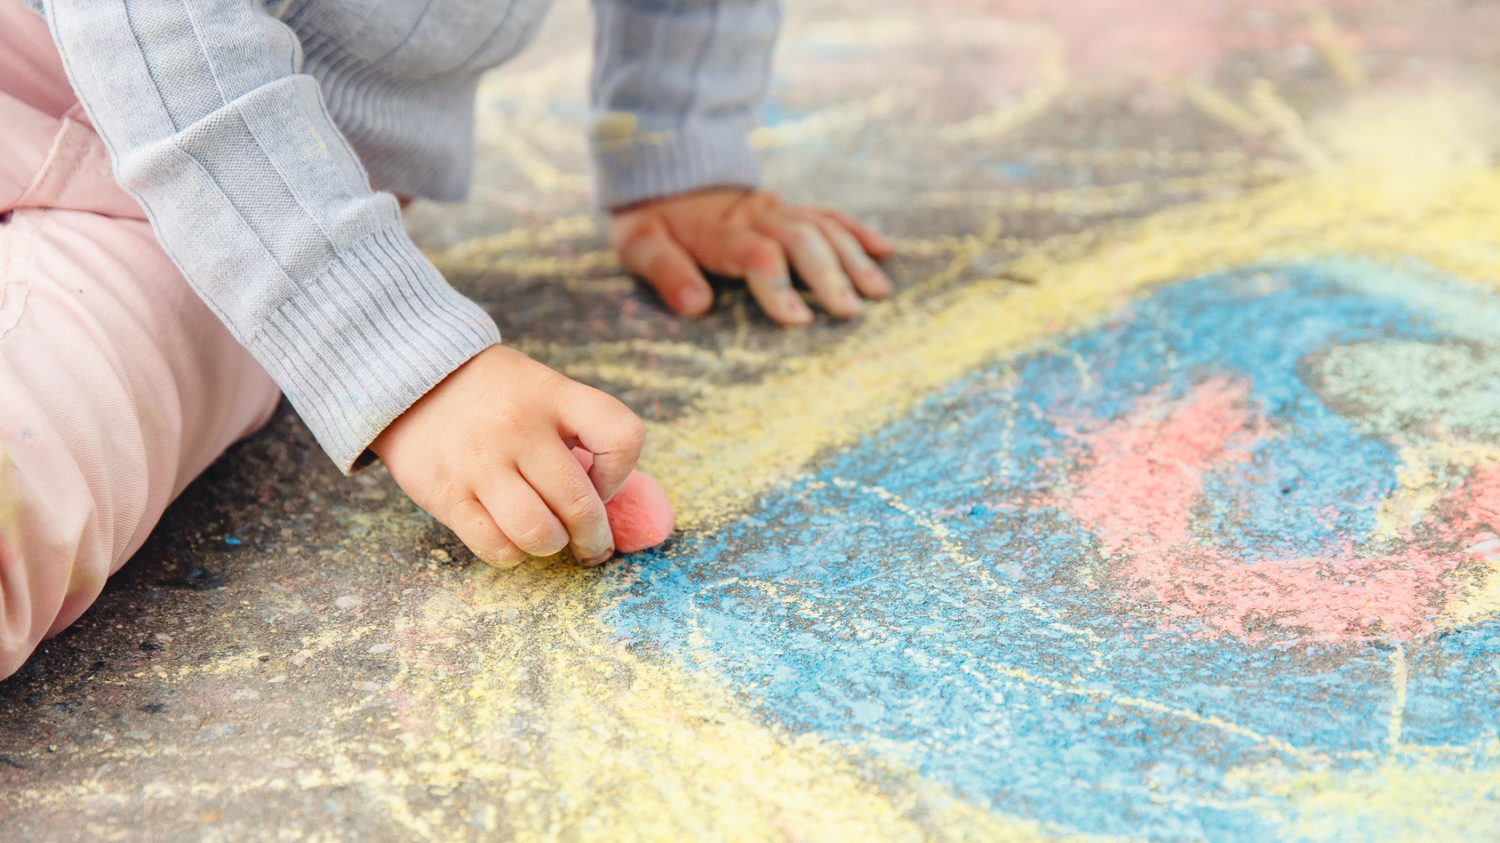 Child draws hand in colored chalk drawing on pavement. Top view